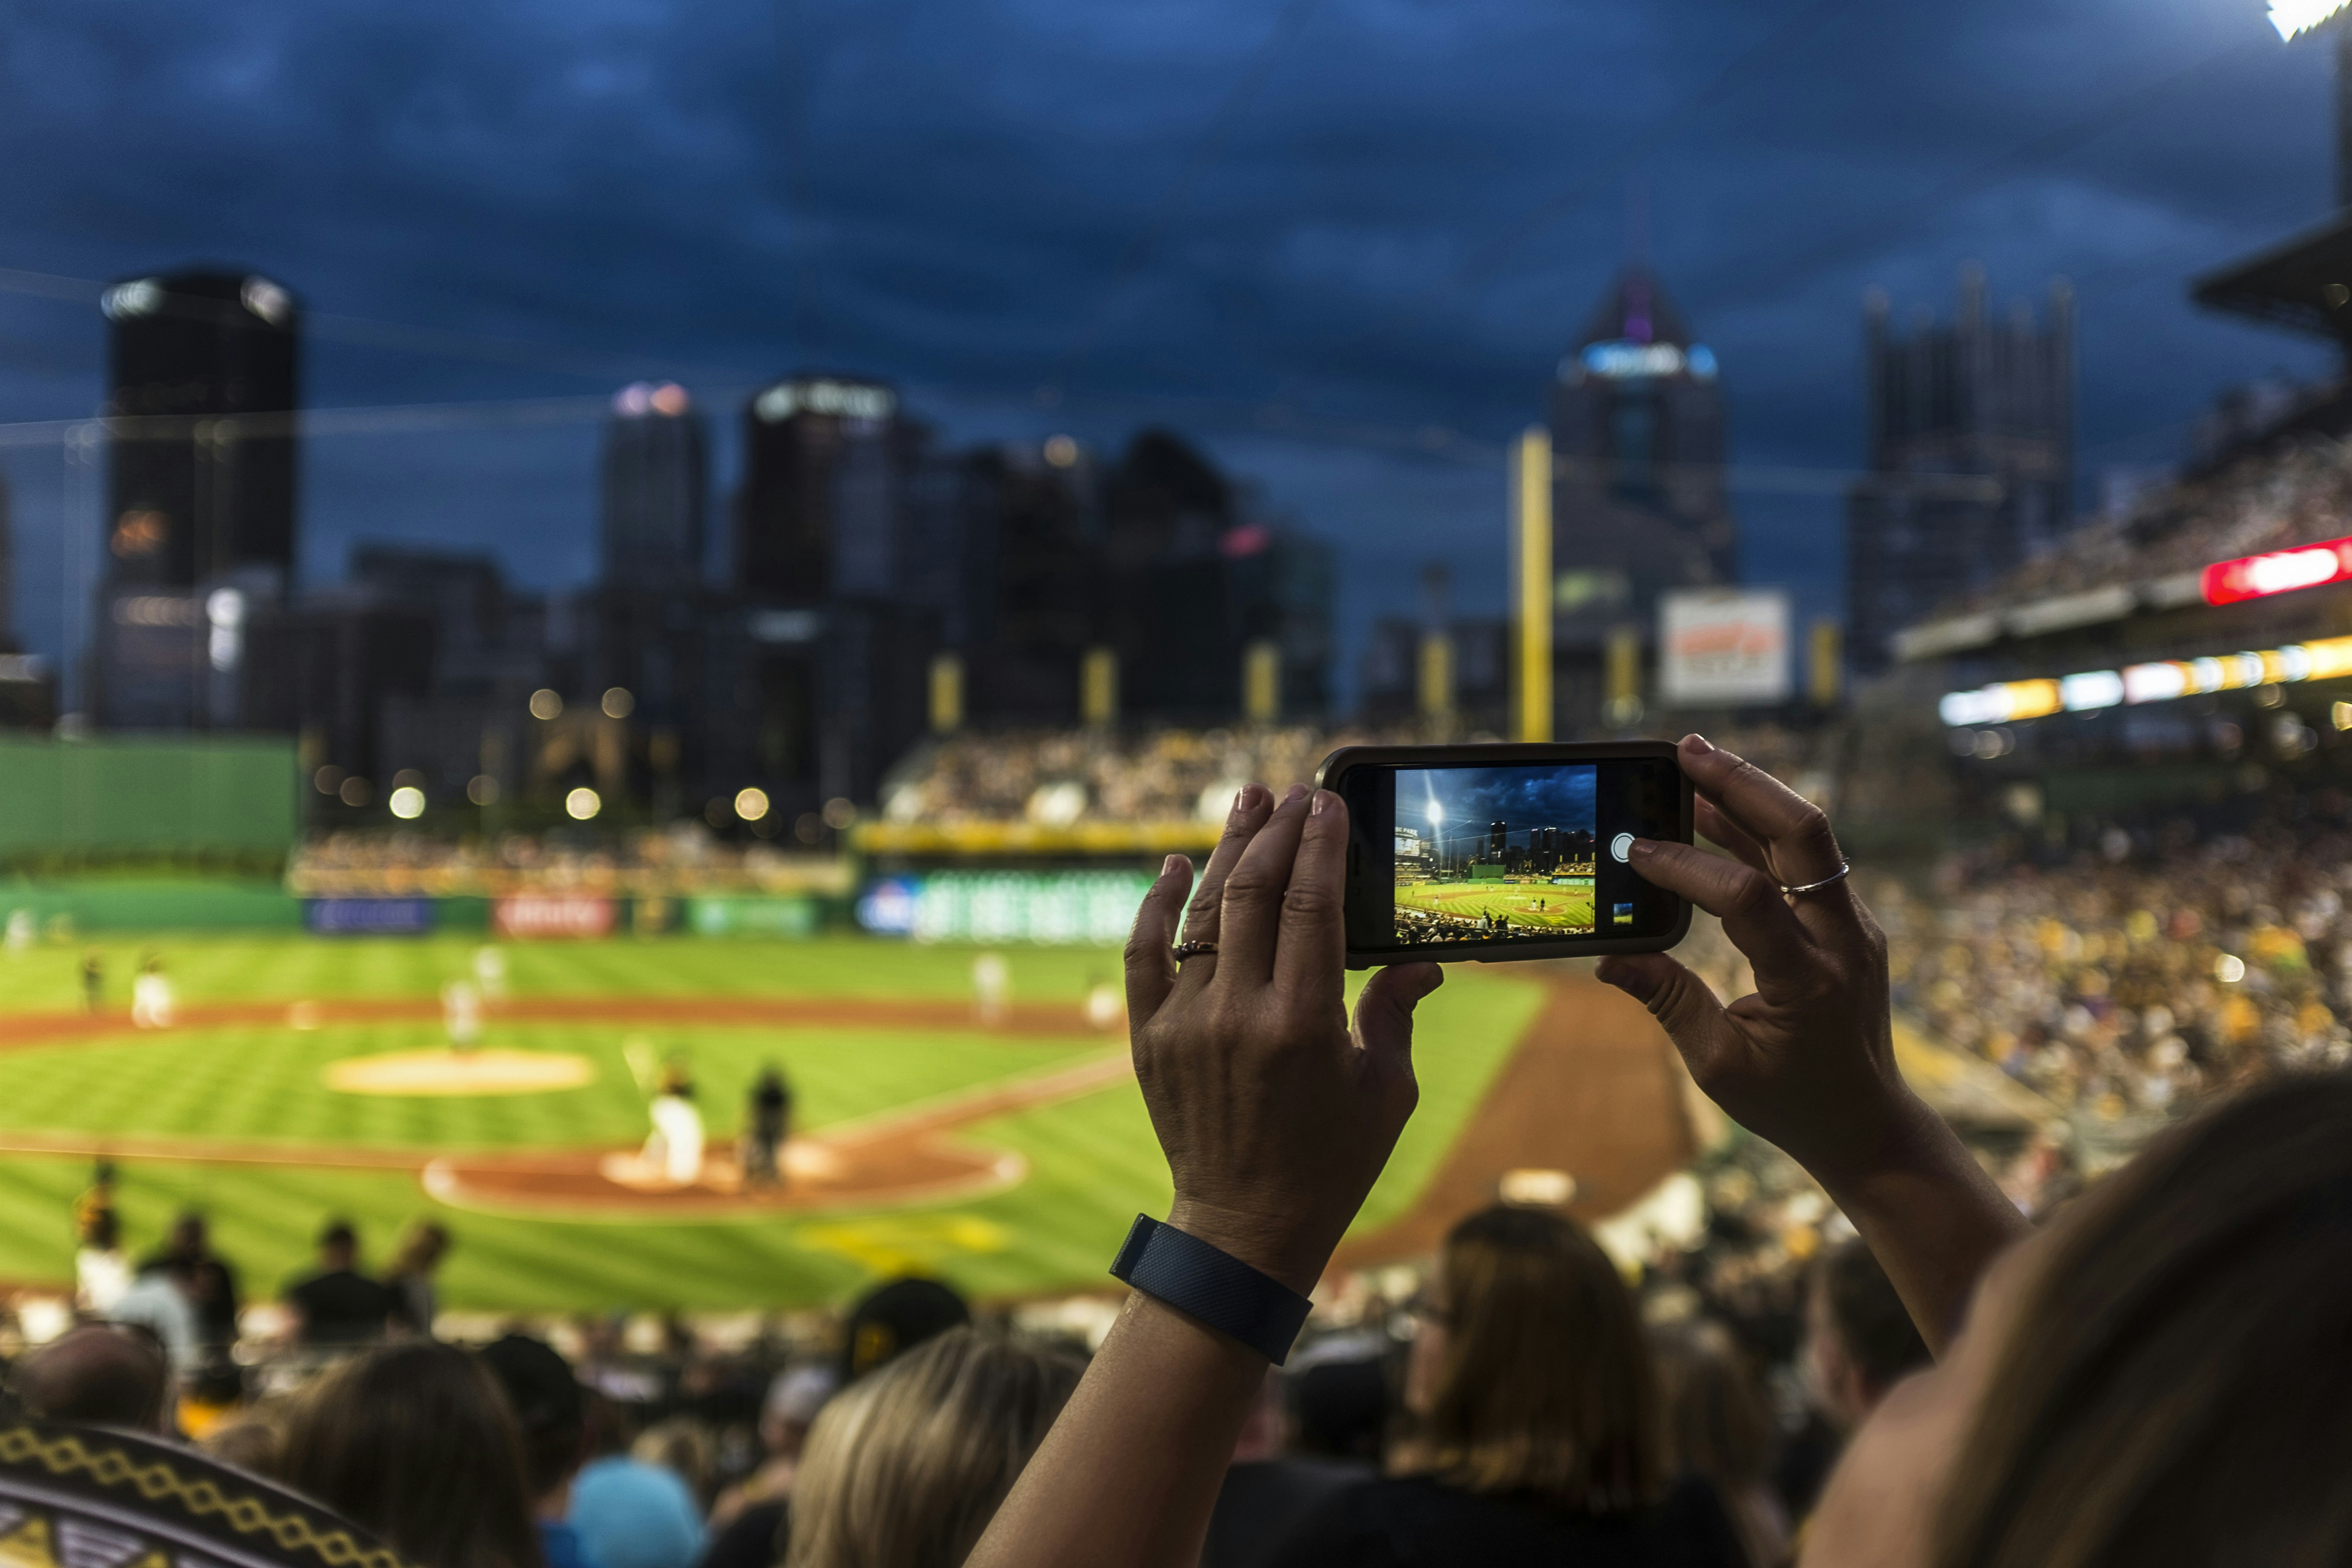 Inside a floodlit baseball stadium at night, a woman is holding up a cellphone and taking a photo. Her hands and the phone are in sharp focus, while the rest of the scene is blurred.